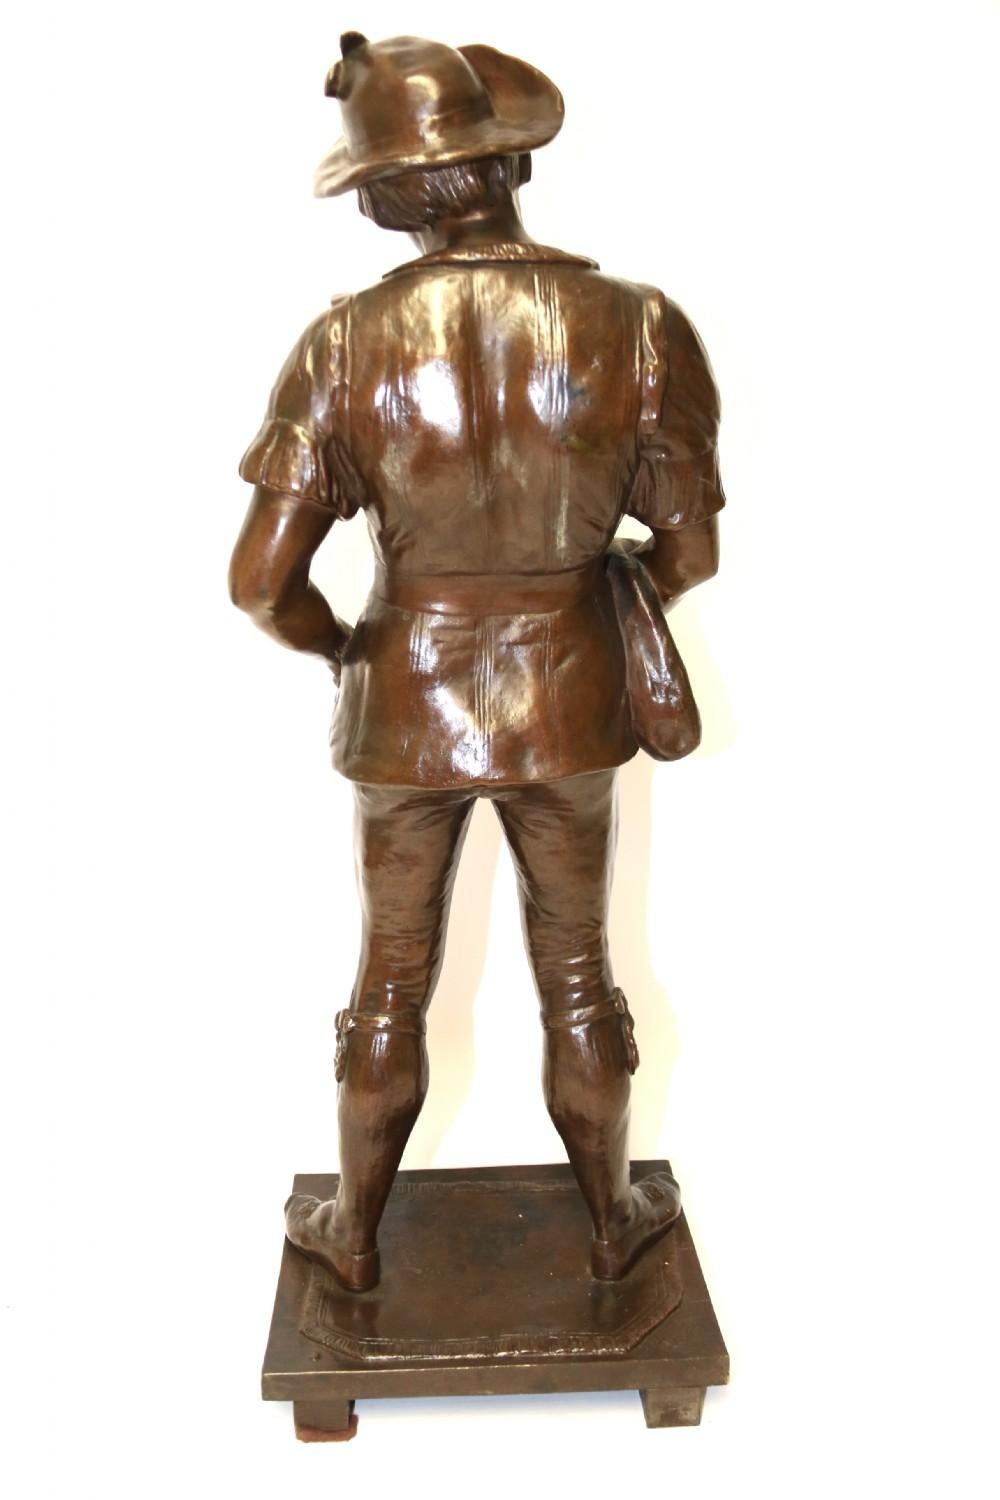 This large and impressive bronze sculpture of Robin Hood was produced in France in the mid-19th century by Louis Joseph Le Boeuf, an artist born in 1823-1867.

This bronze depicts Robin Hood standing with a money bag over one arm and wearing a